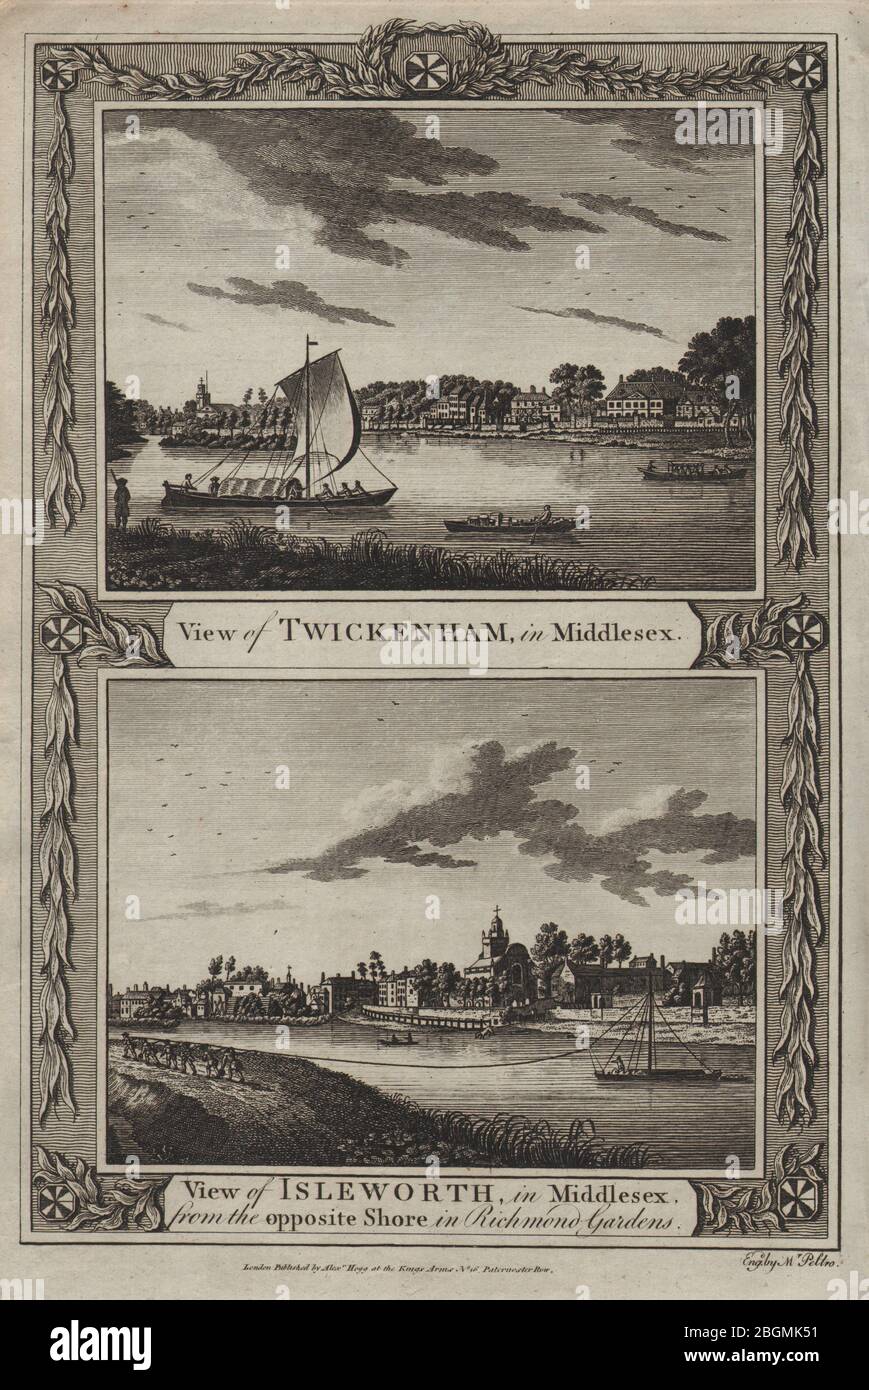 Views of Twickenham, and of Isleworth from Richmond Old Deer Park. THORNTON 1784 Stock Photo